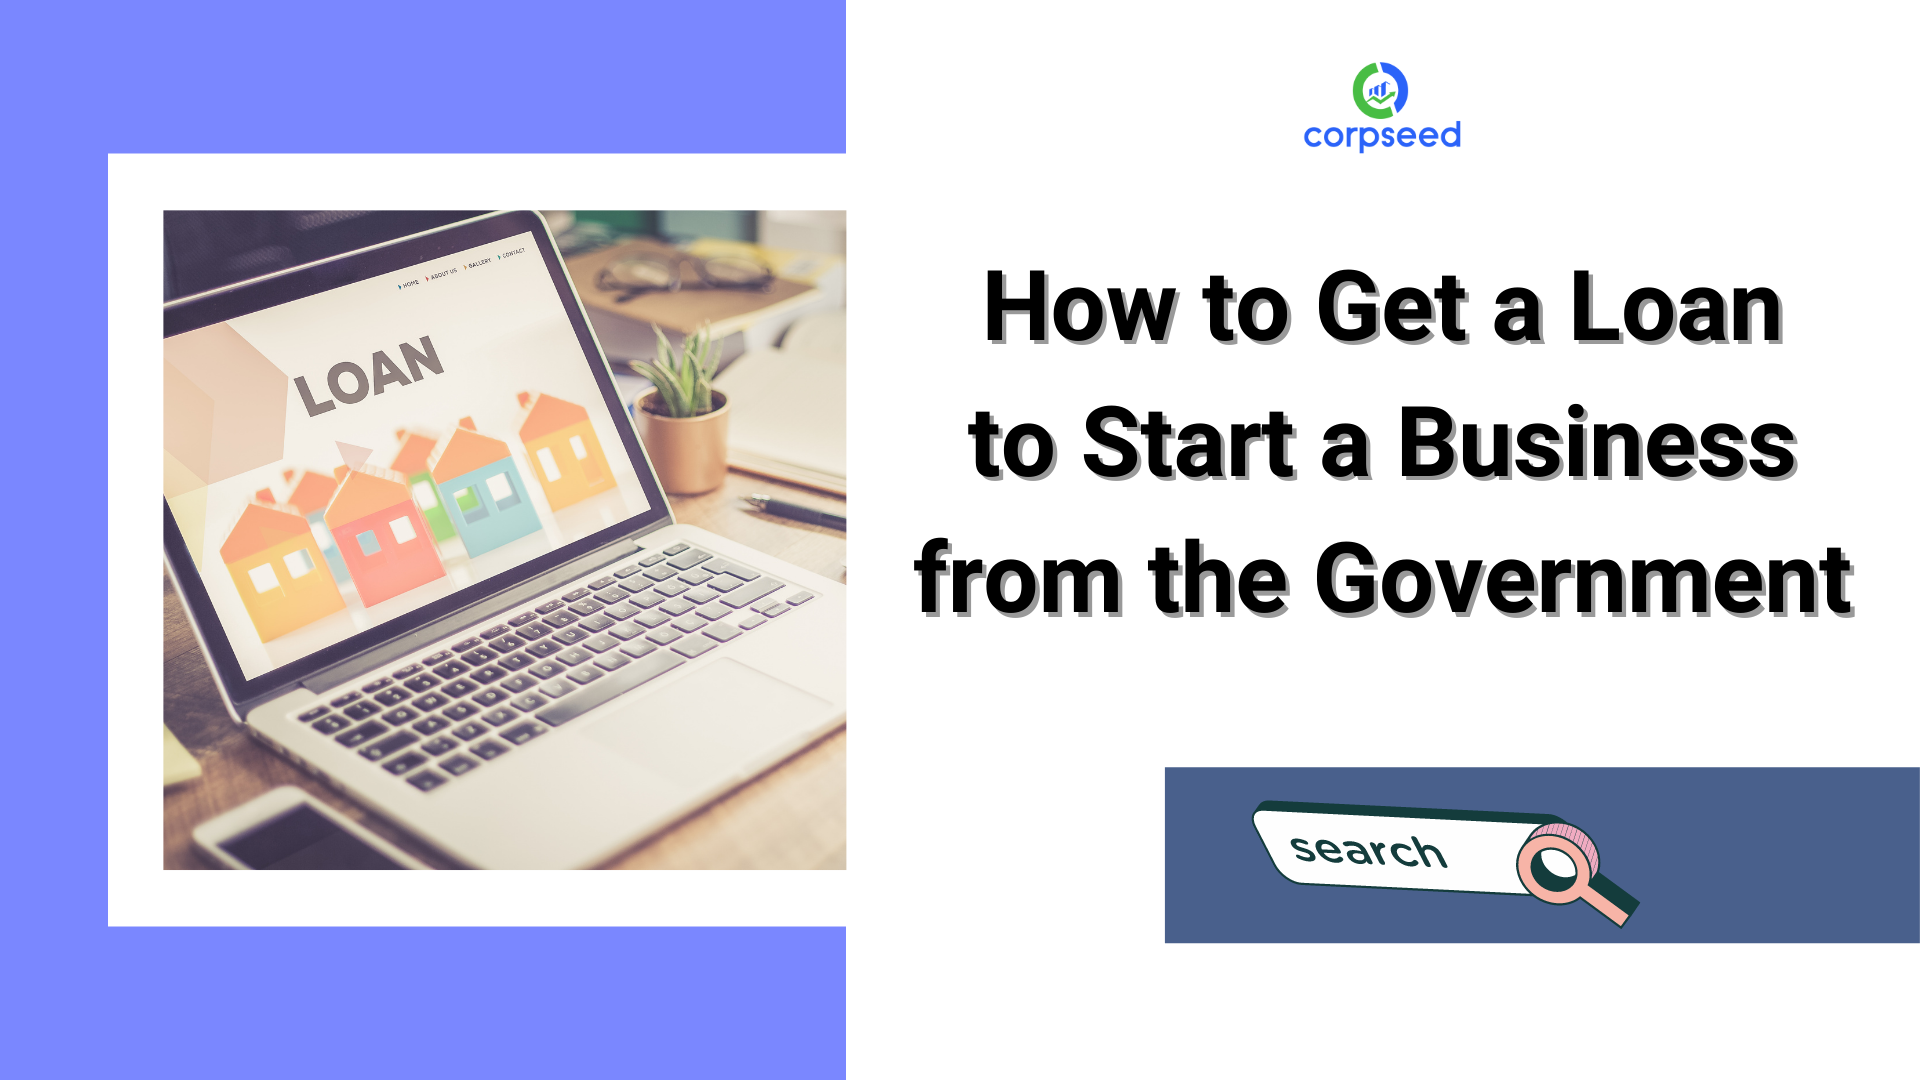 how-to-get-a-loan-to-start-a-business-from-the-government-corpseed.png